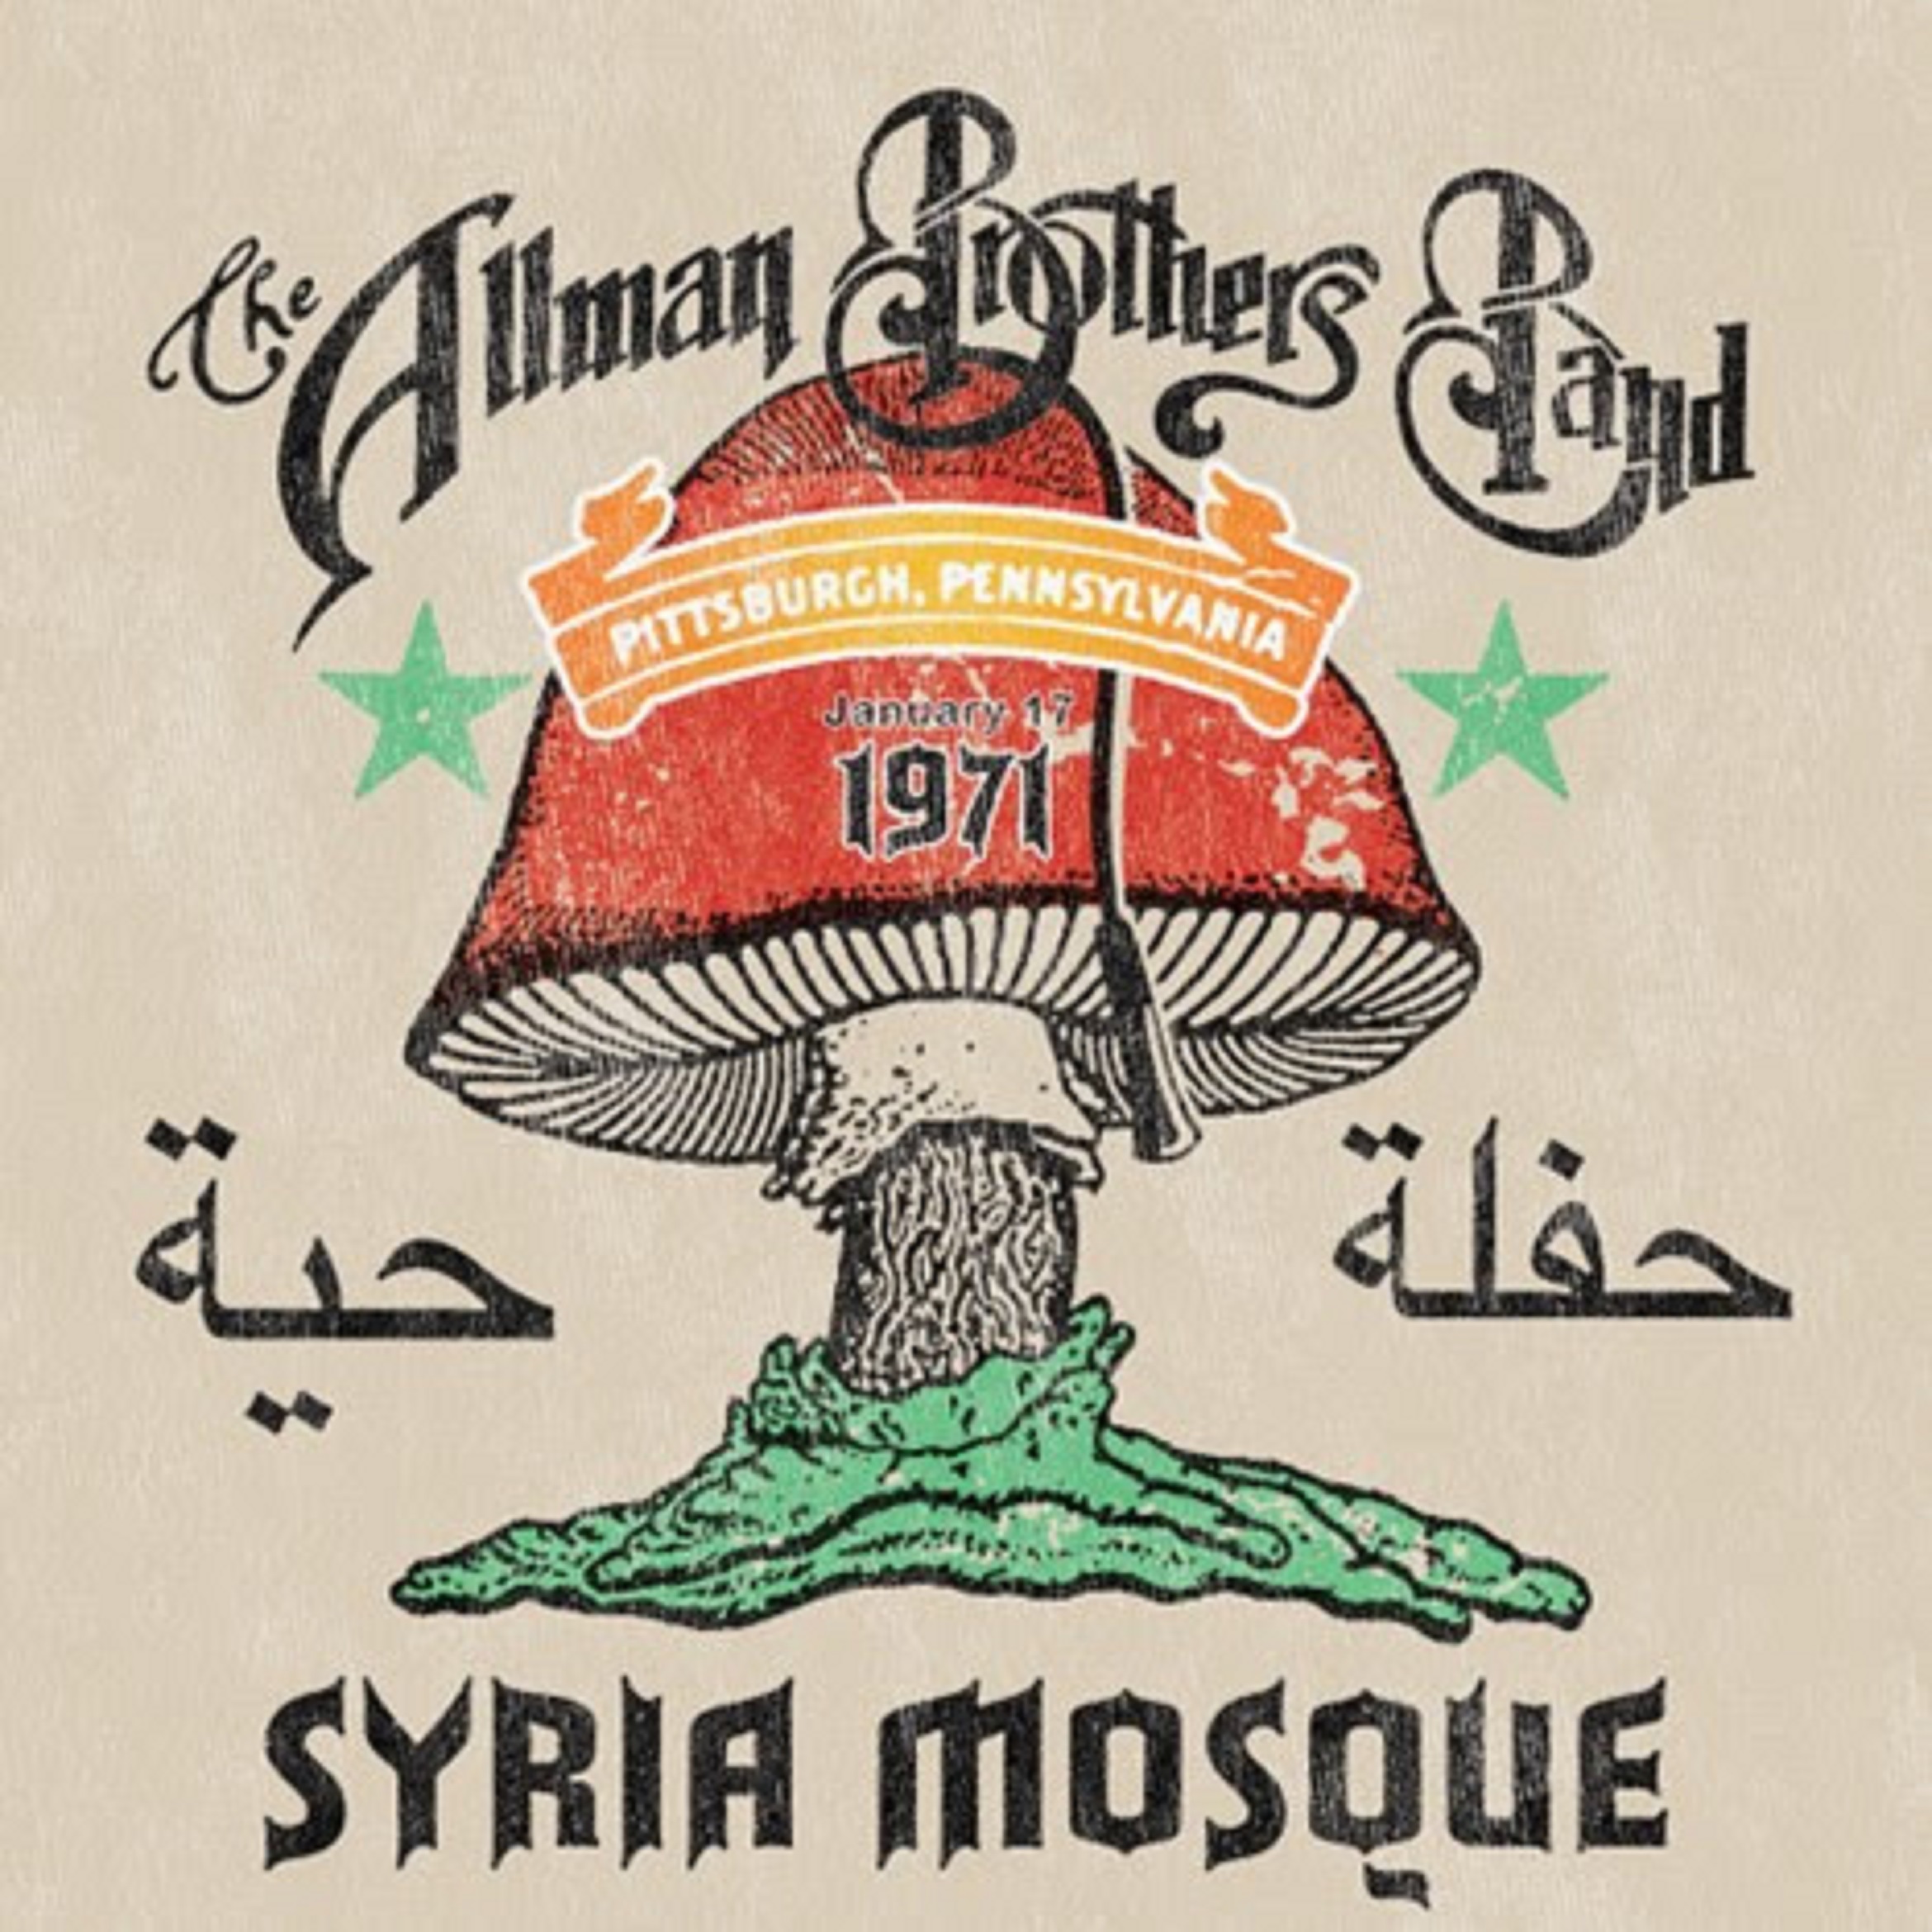 New Allman Brothers’ Syria Mosque 1/17/71  Release Unearths Musical Gold